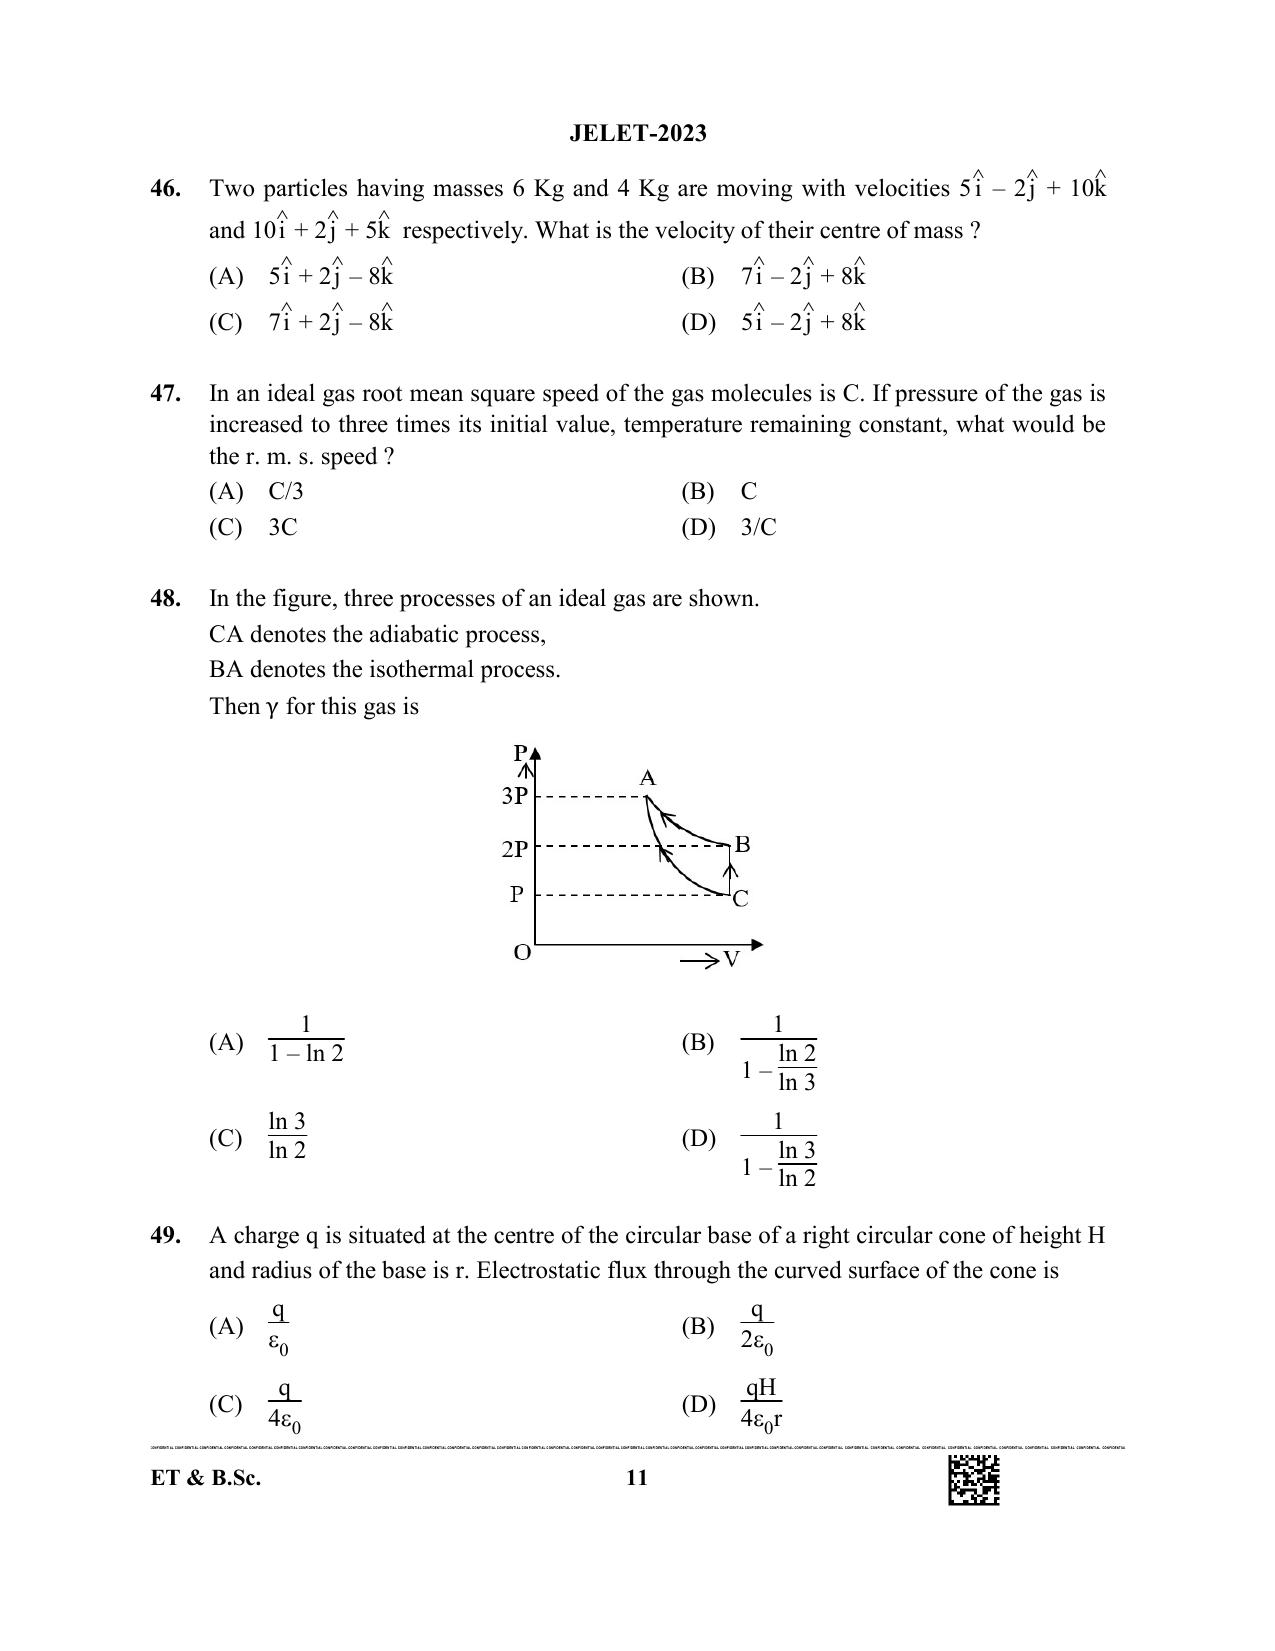 WBJEE JELET 2023 Paper I (ET & BSC) Question Papers - Page 11